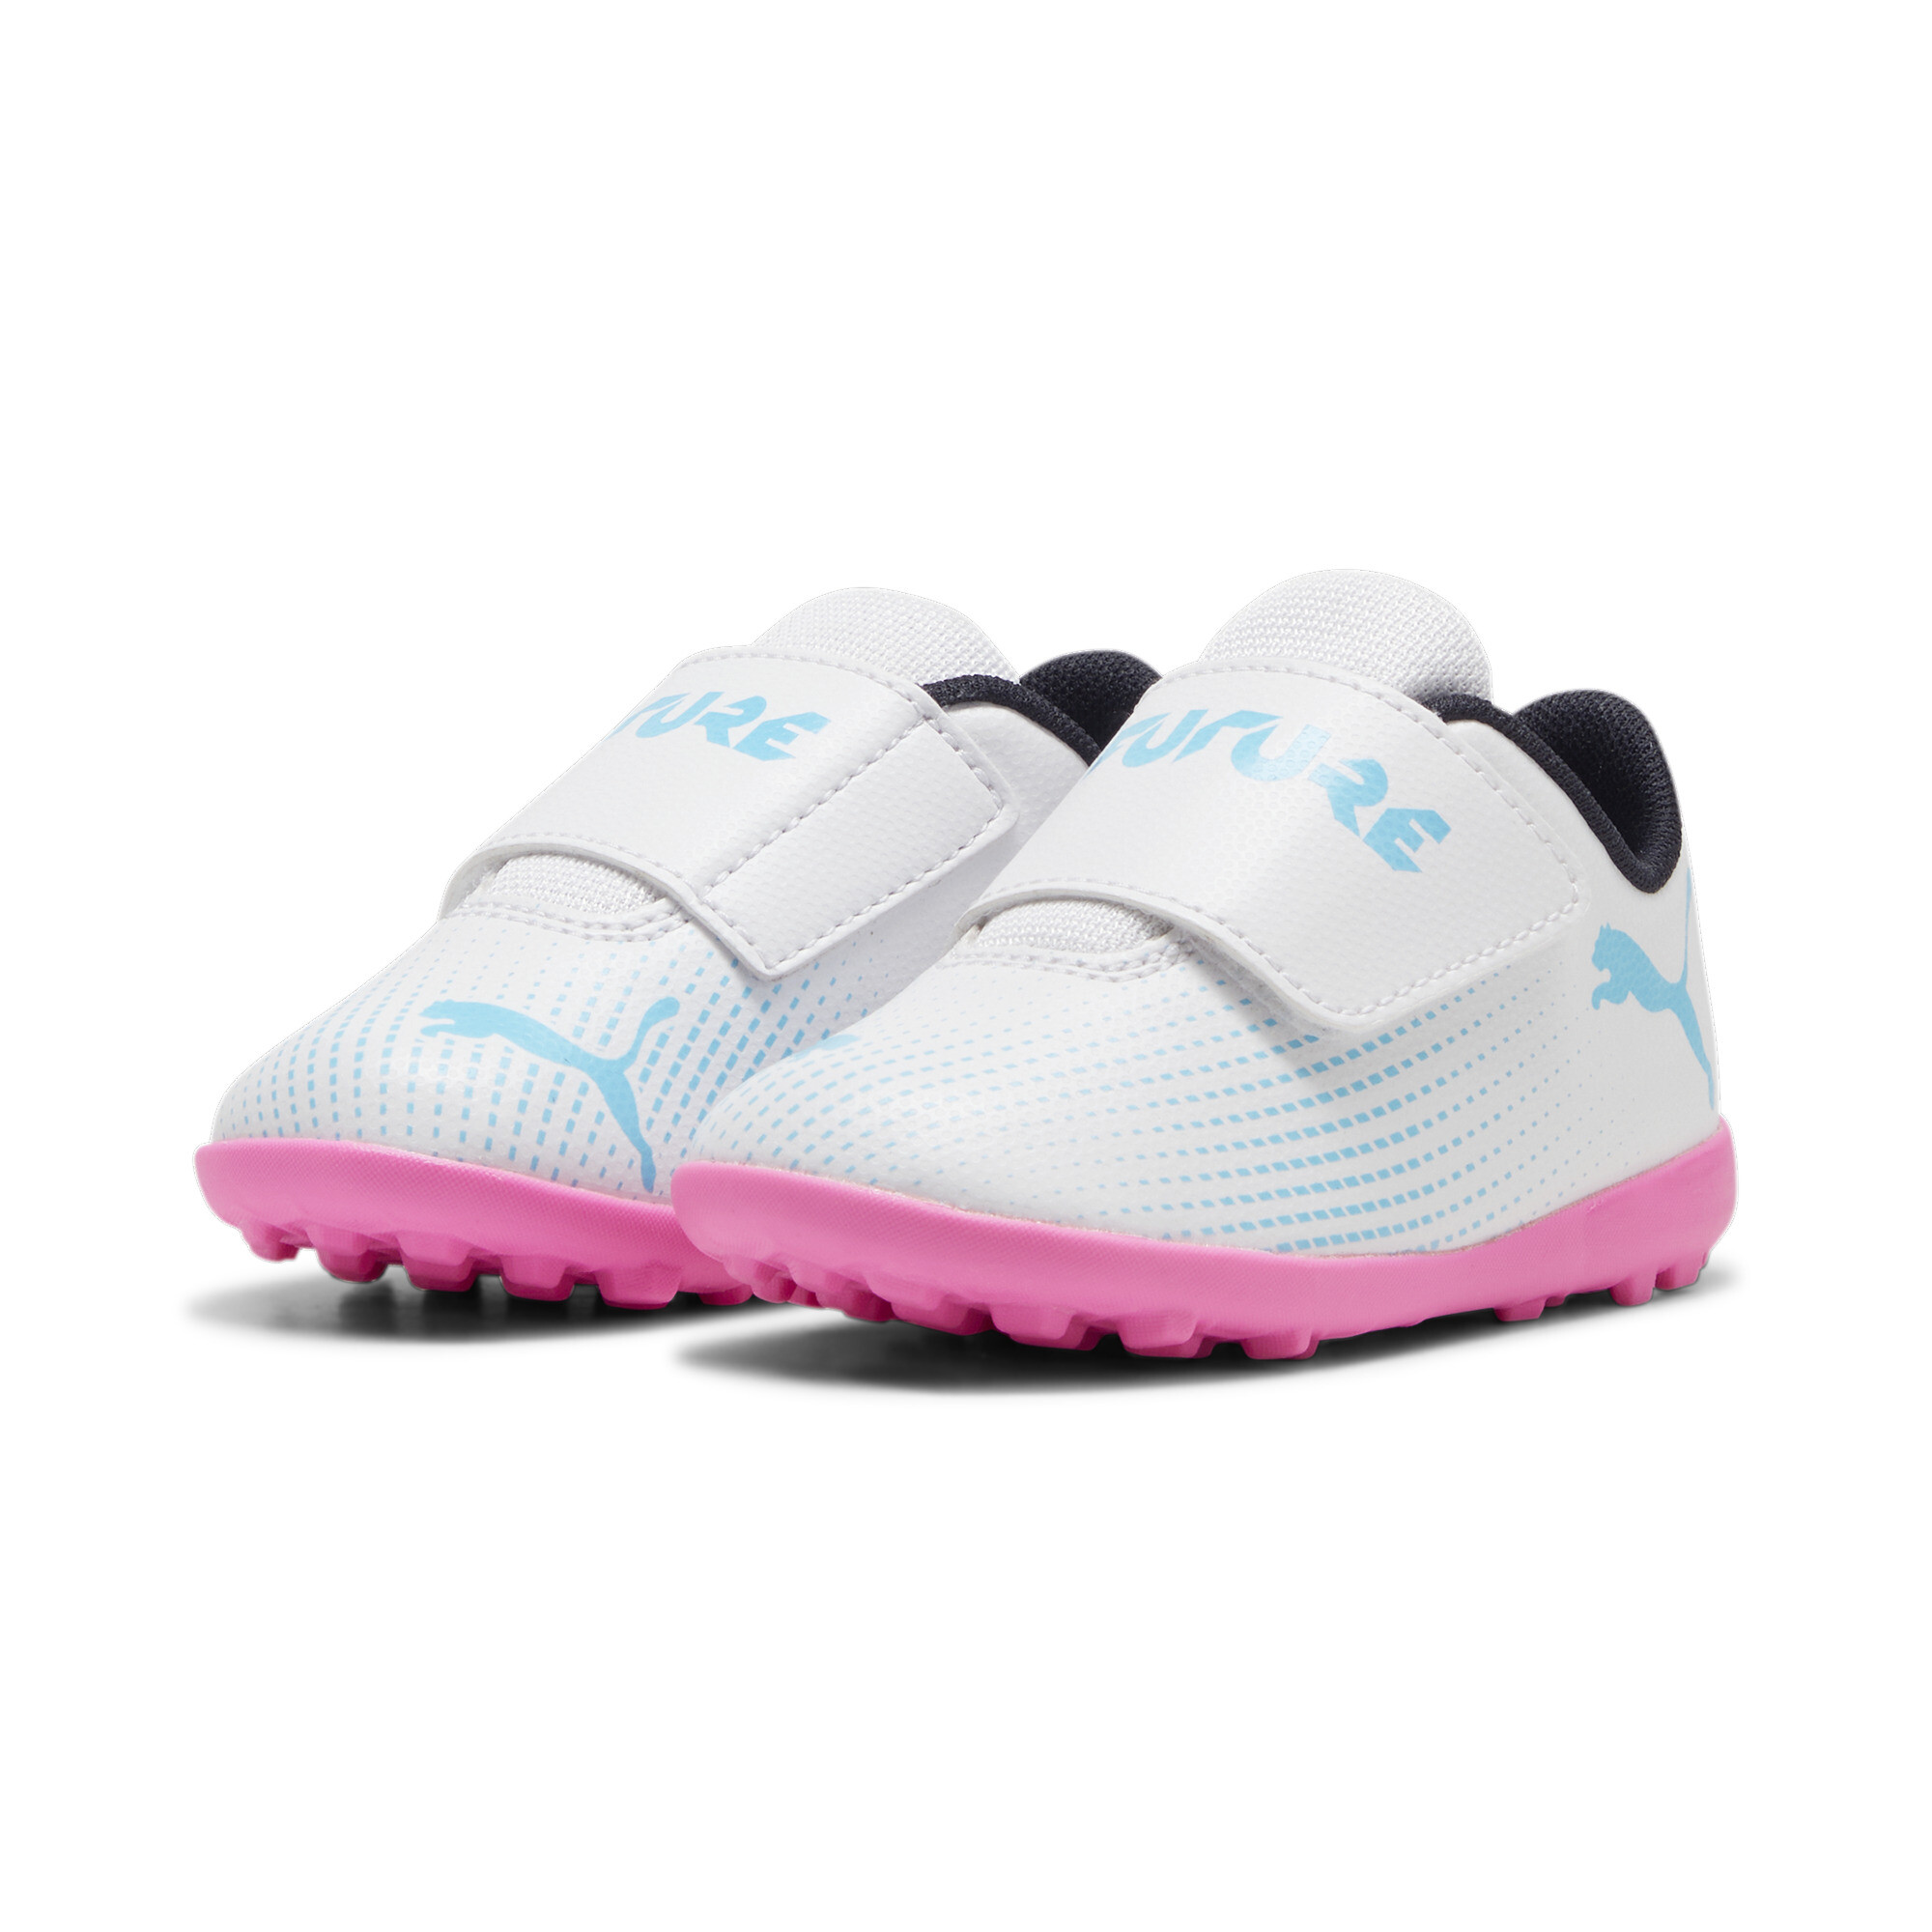 Kids' PUMA FUTURE 7 PLAY TT Toddlers' Football Boots In White/Pink, Size EU 27